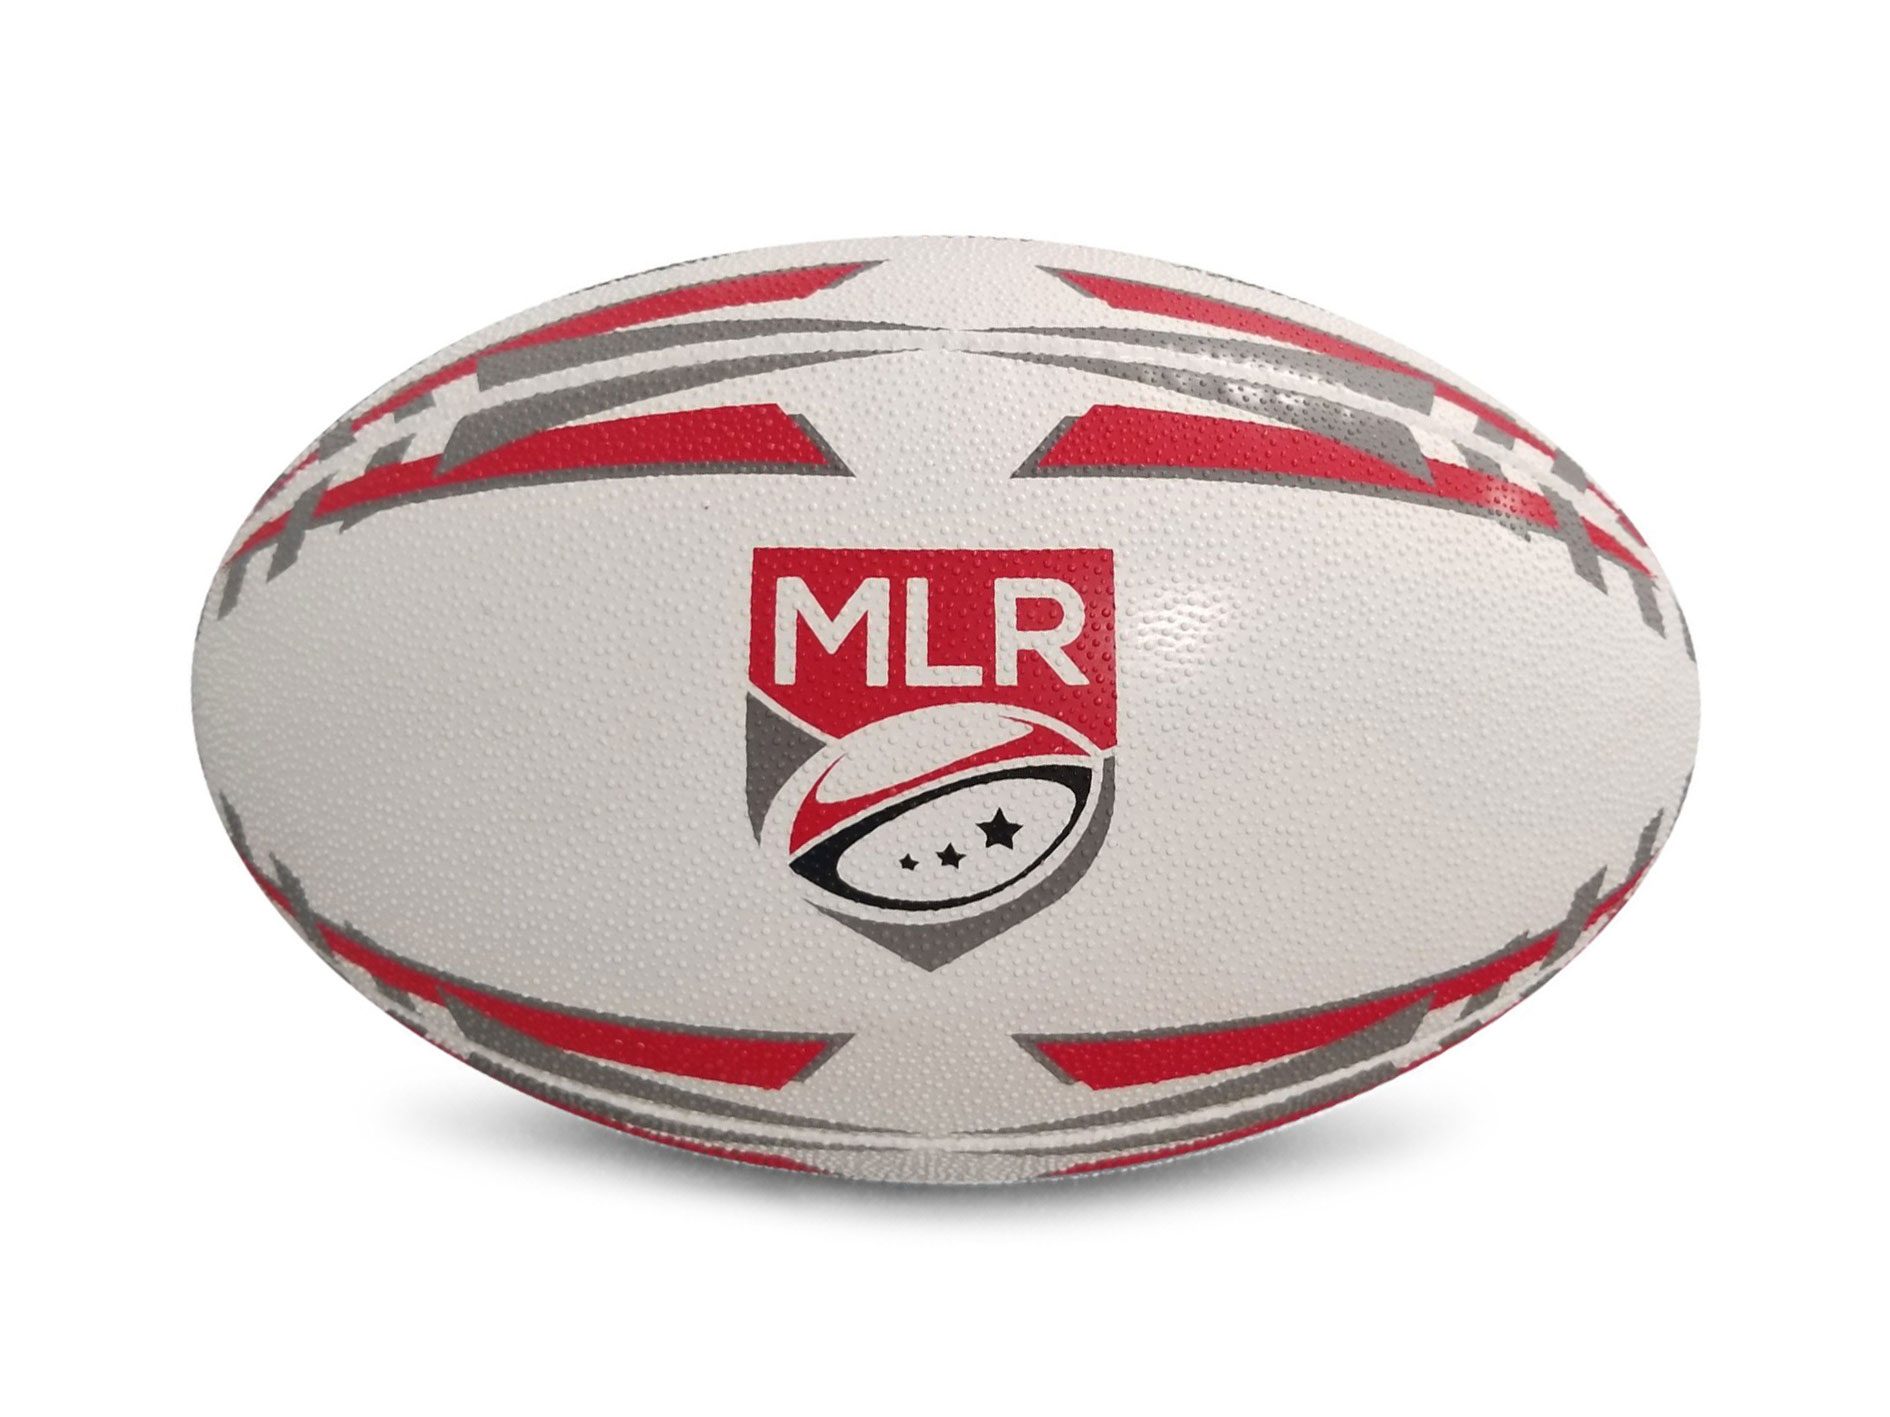 Every Major League Rugby 2019 Jersey Revealed